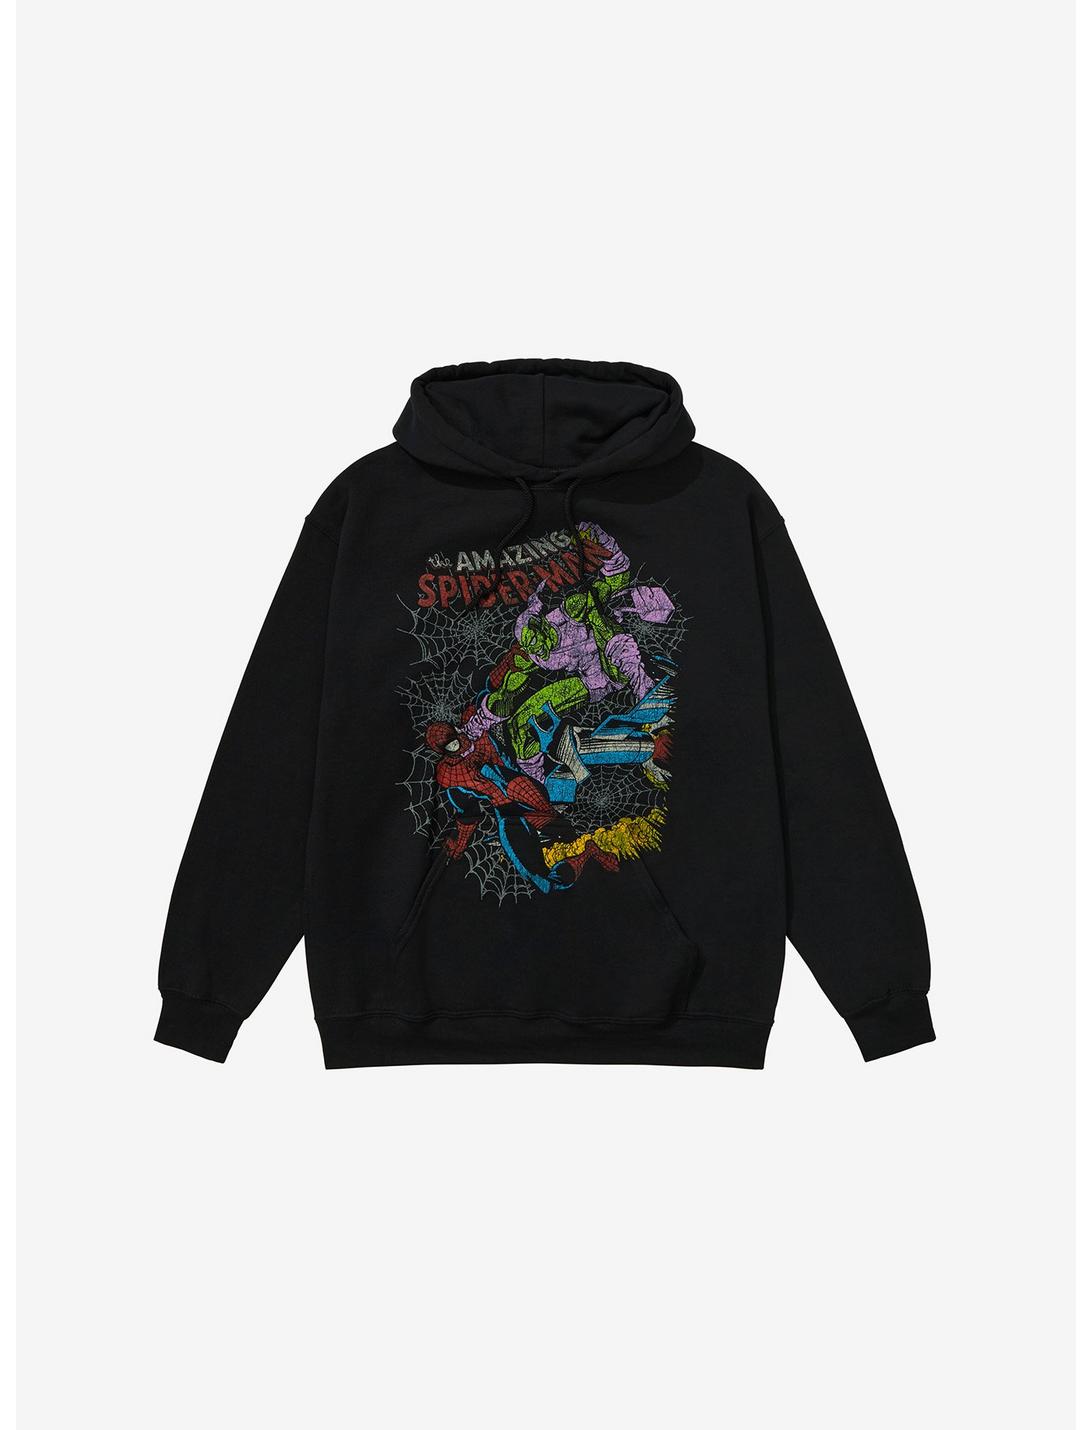 Marvel The Amazing Spider-Man Green Goblin Fight Hoodie, BLACK, hi-res